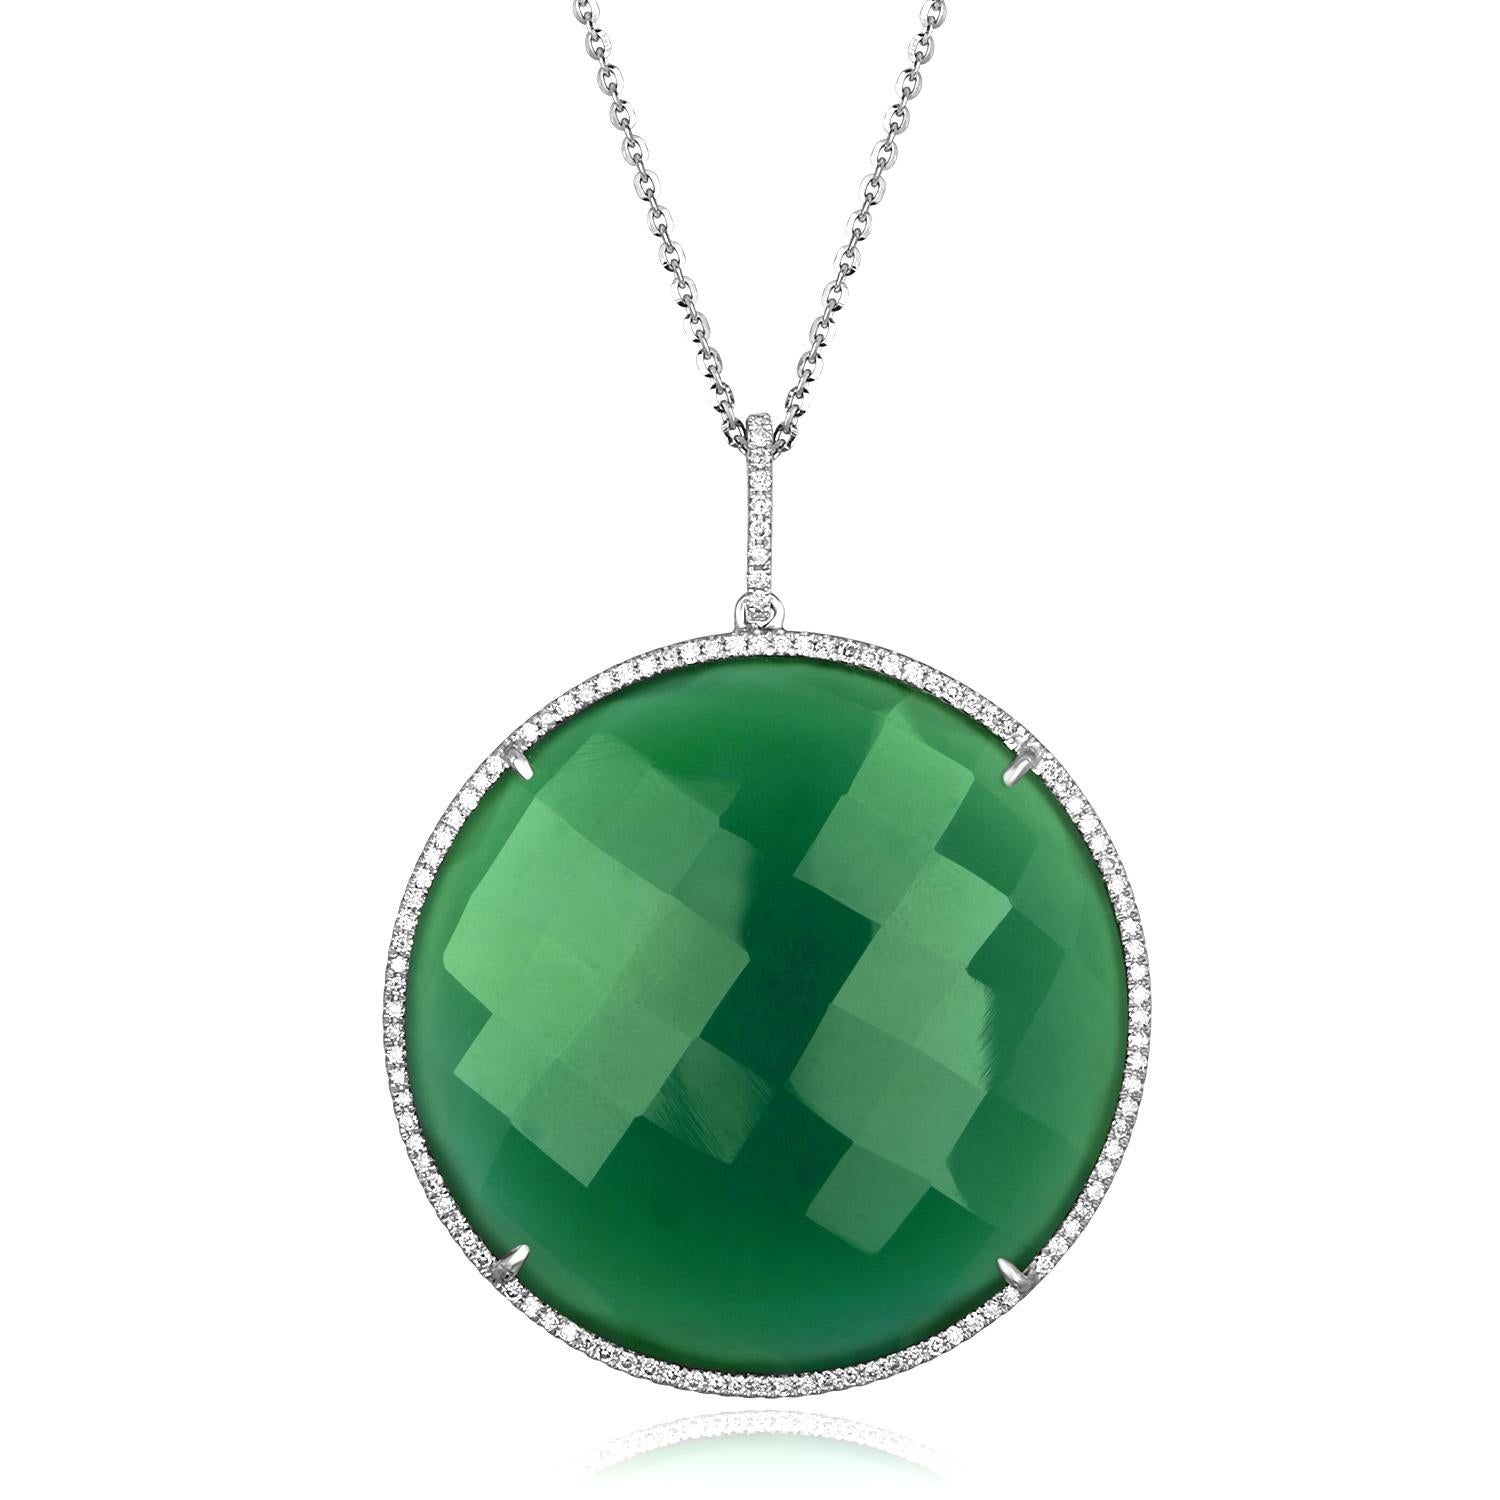 Beautiful Large Green Agate Pendant On A Chain.
The pendant is 18K White Gold.
The stone is Green Agate 64.54Ct
There are 0.68 Ct in Diamonds H SI
The pendant comes with a 18K White Gold Chain.
The chain measures 16